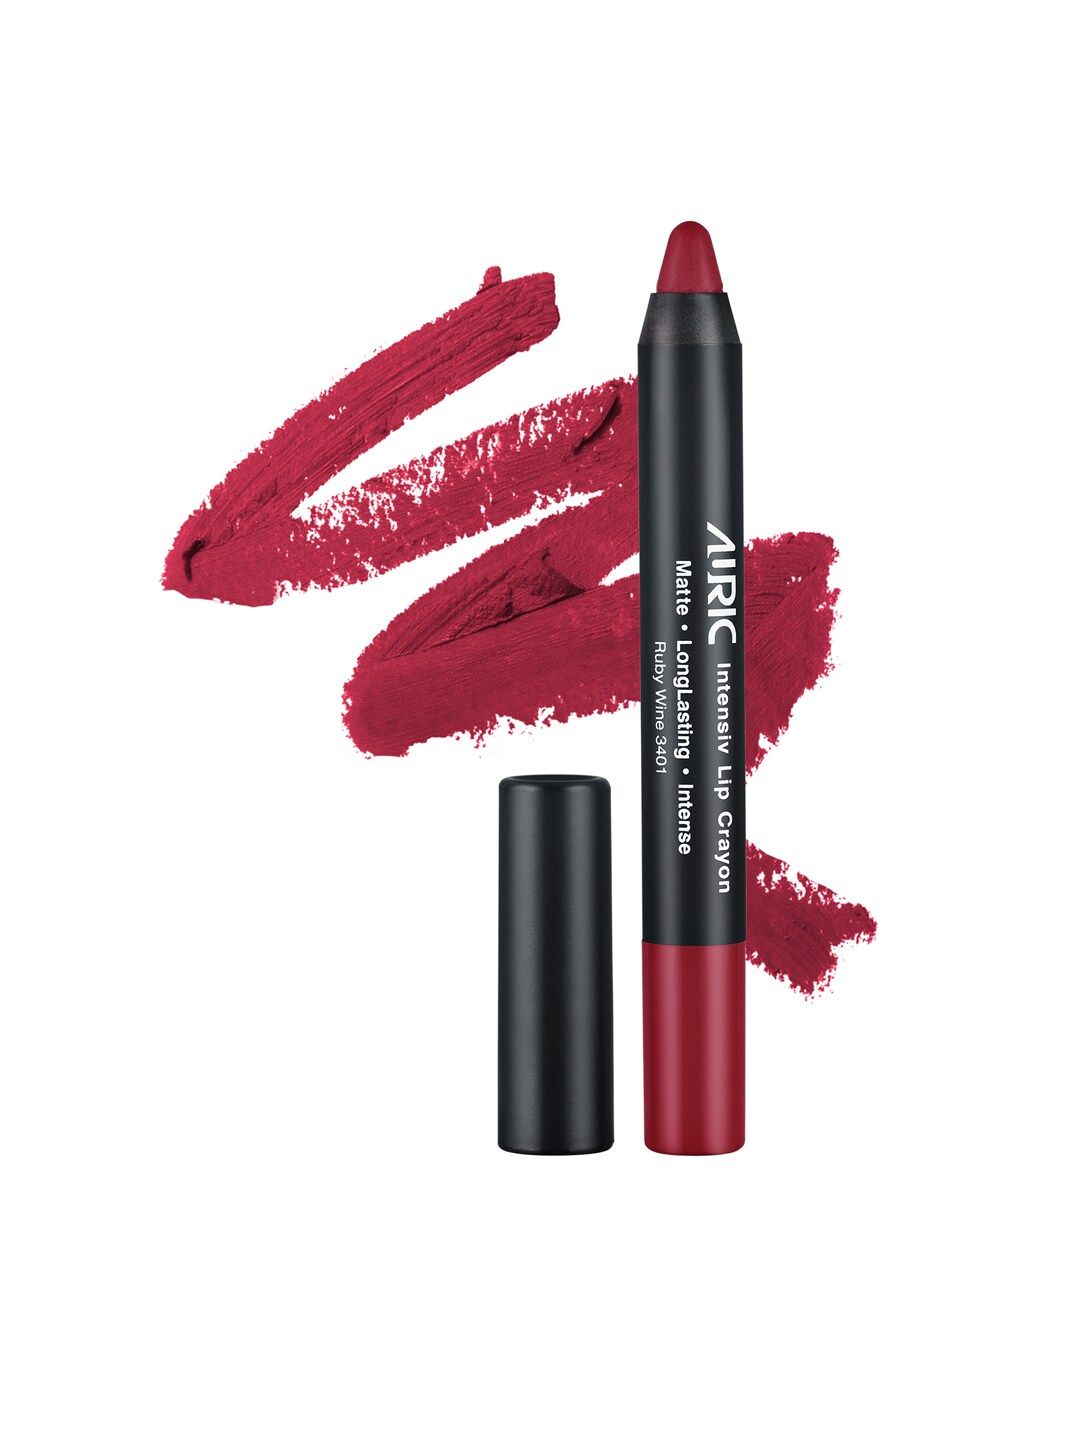 AURIC Intensiv Lip Crayon Ruby Wine 3401 2.8 g Price in India